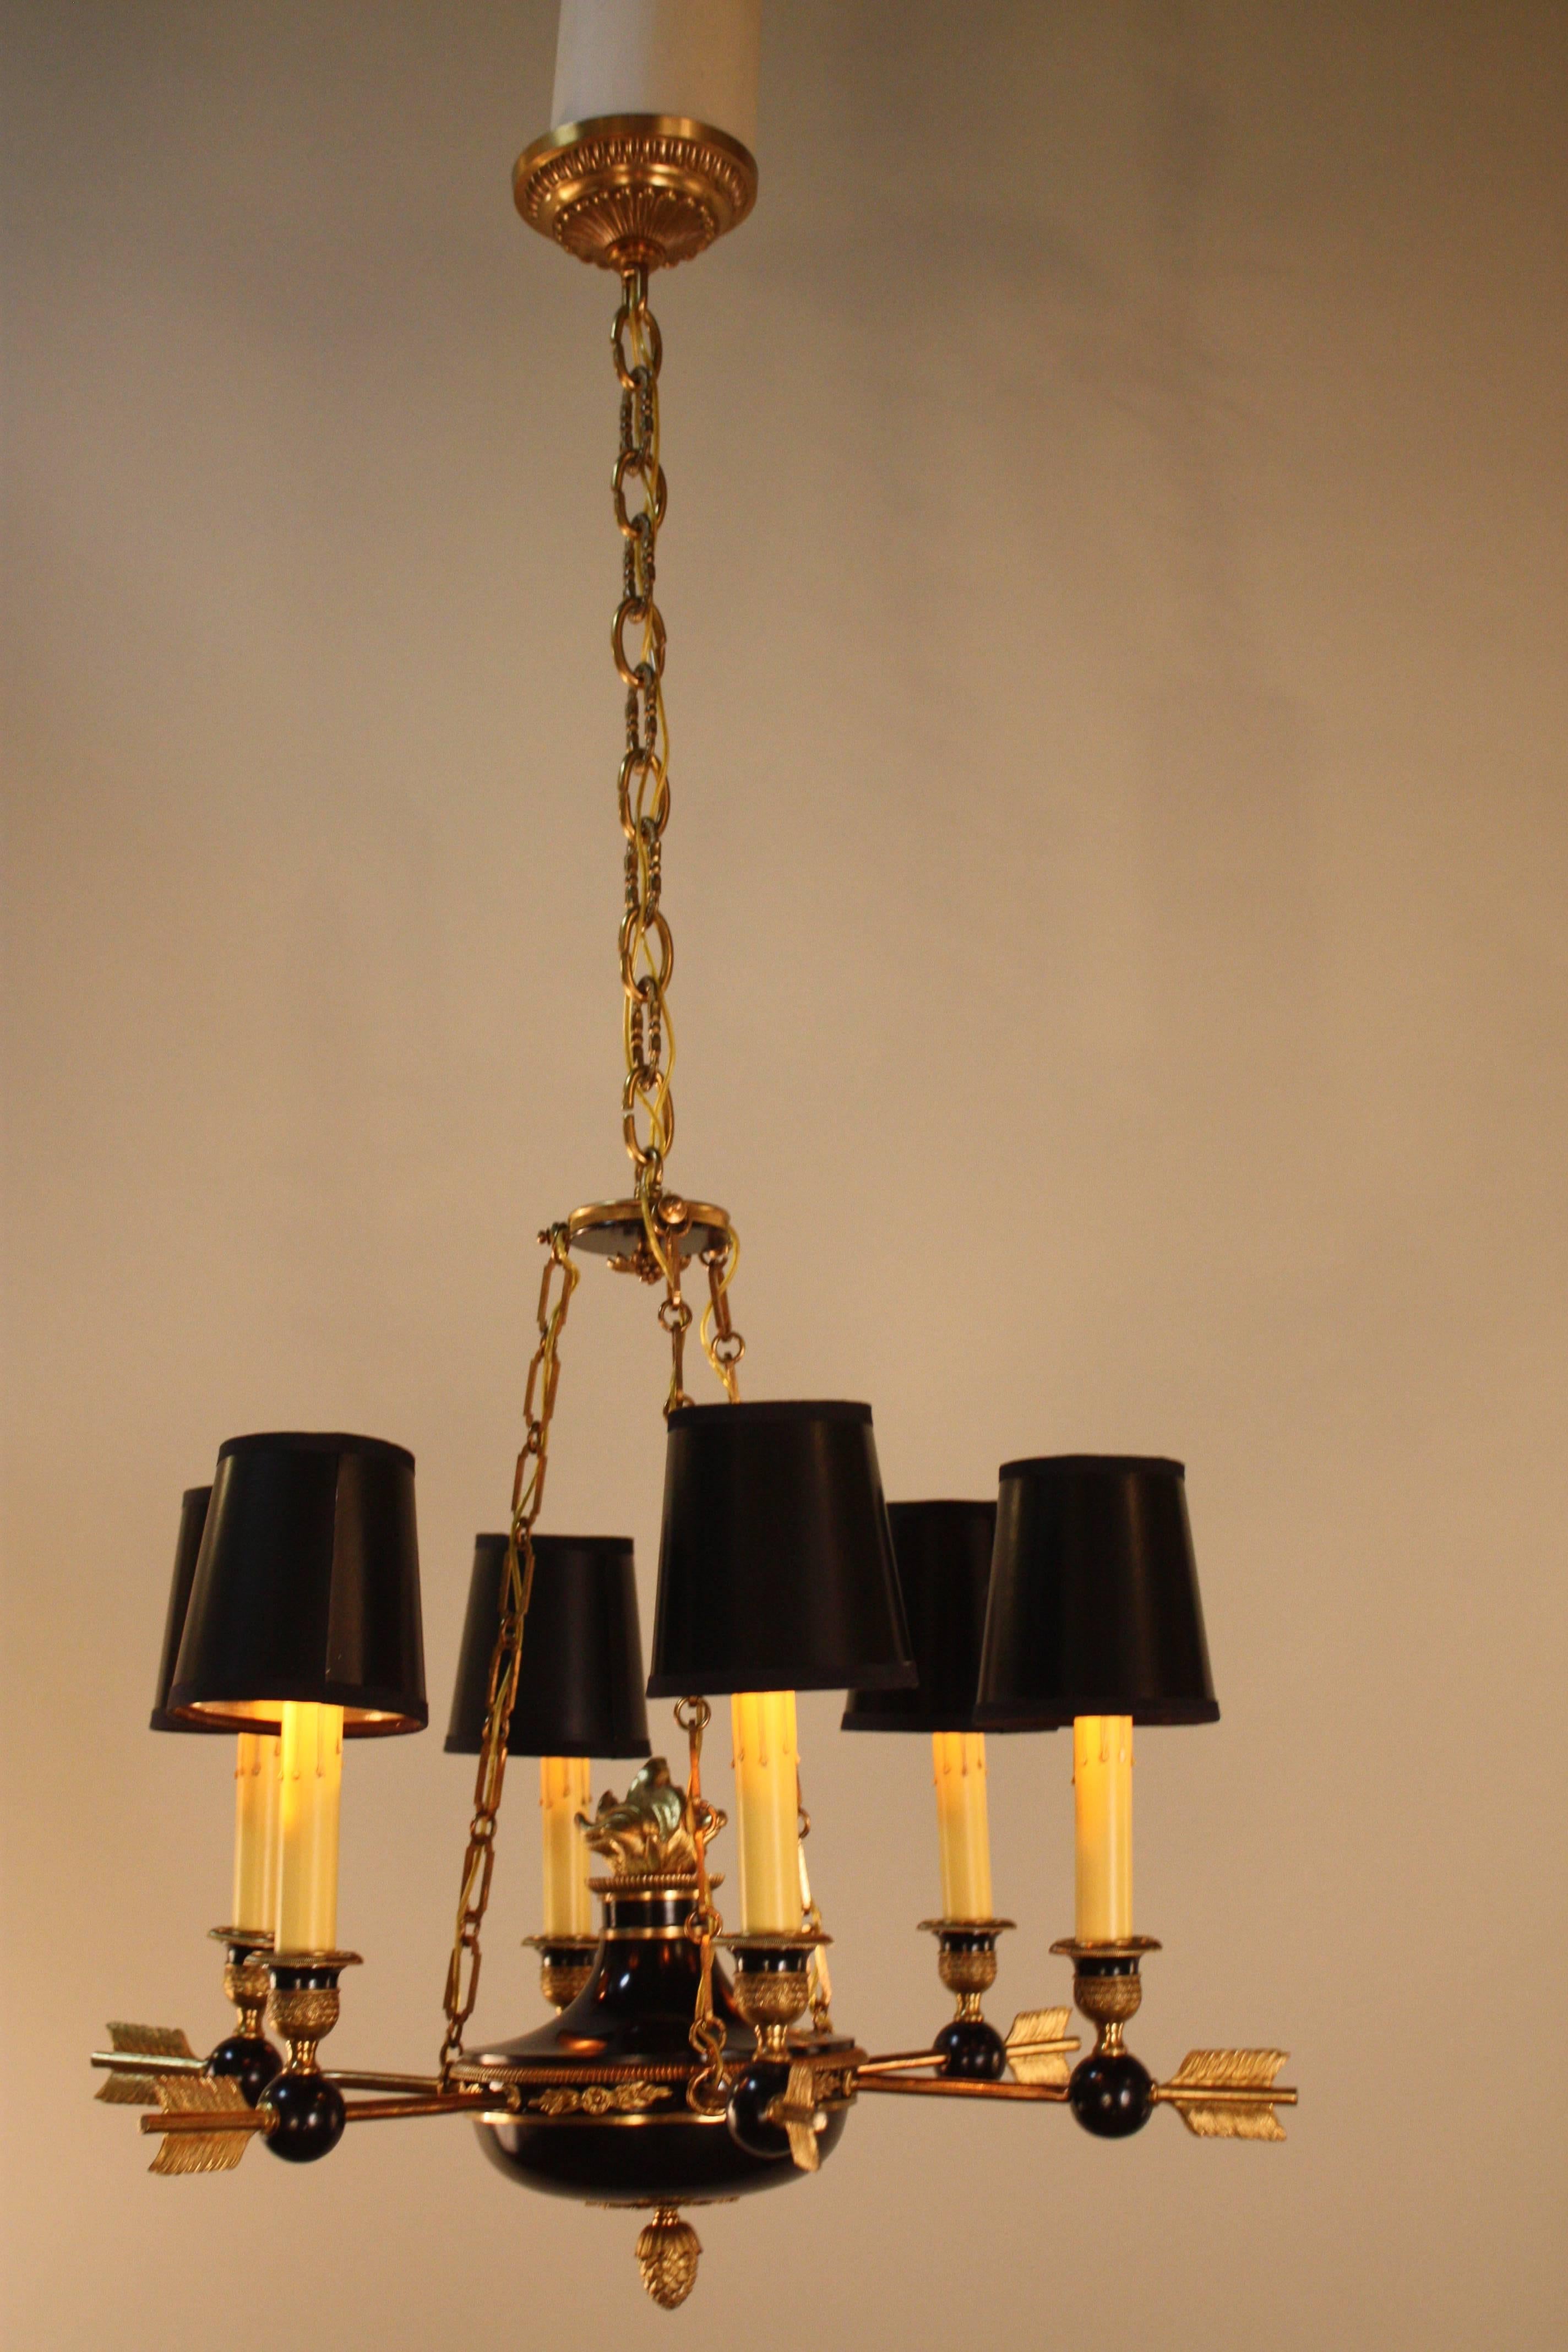 This beautiful French Empire chandelier is made of bronze and black lacquer. Featuring six lights, each arm has the design of the end of an arrow pointing towards the centre of this fantastic chandelier.
Measures: This chandelier is 21